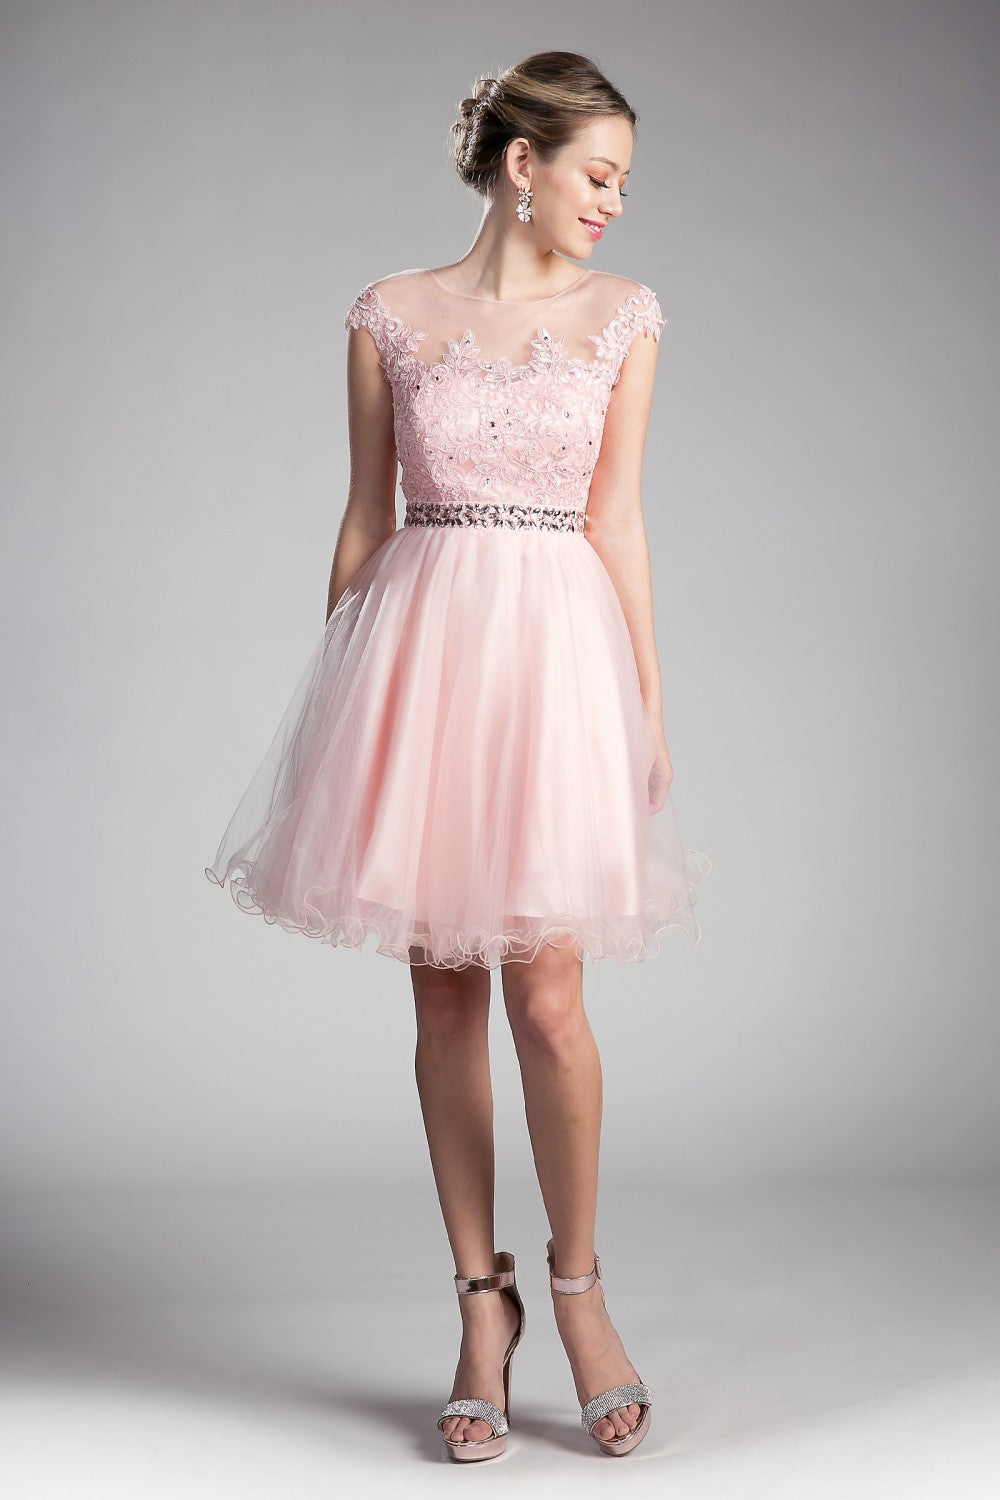 MyFashion.com - Beaded Lace Bodice Tulle Short Dress(UJ0012) - Cinderella Divine promdress eveningdress fashion partydress weddingdress 
 gown homecoming promgown weddinggown 